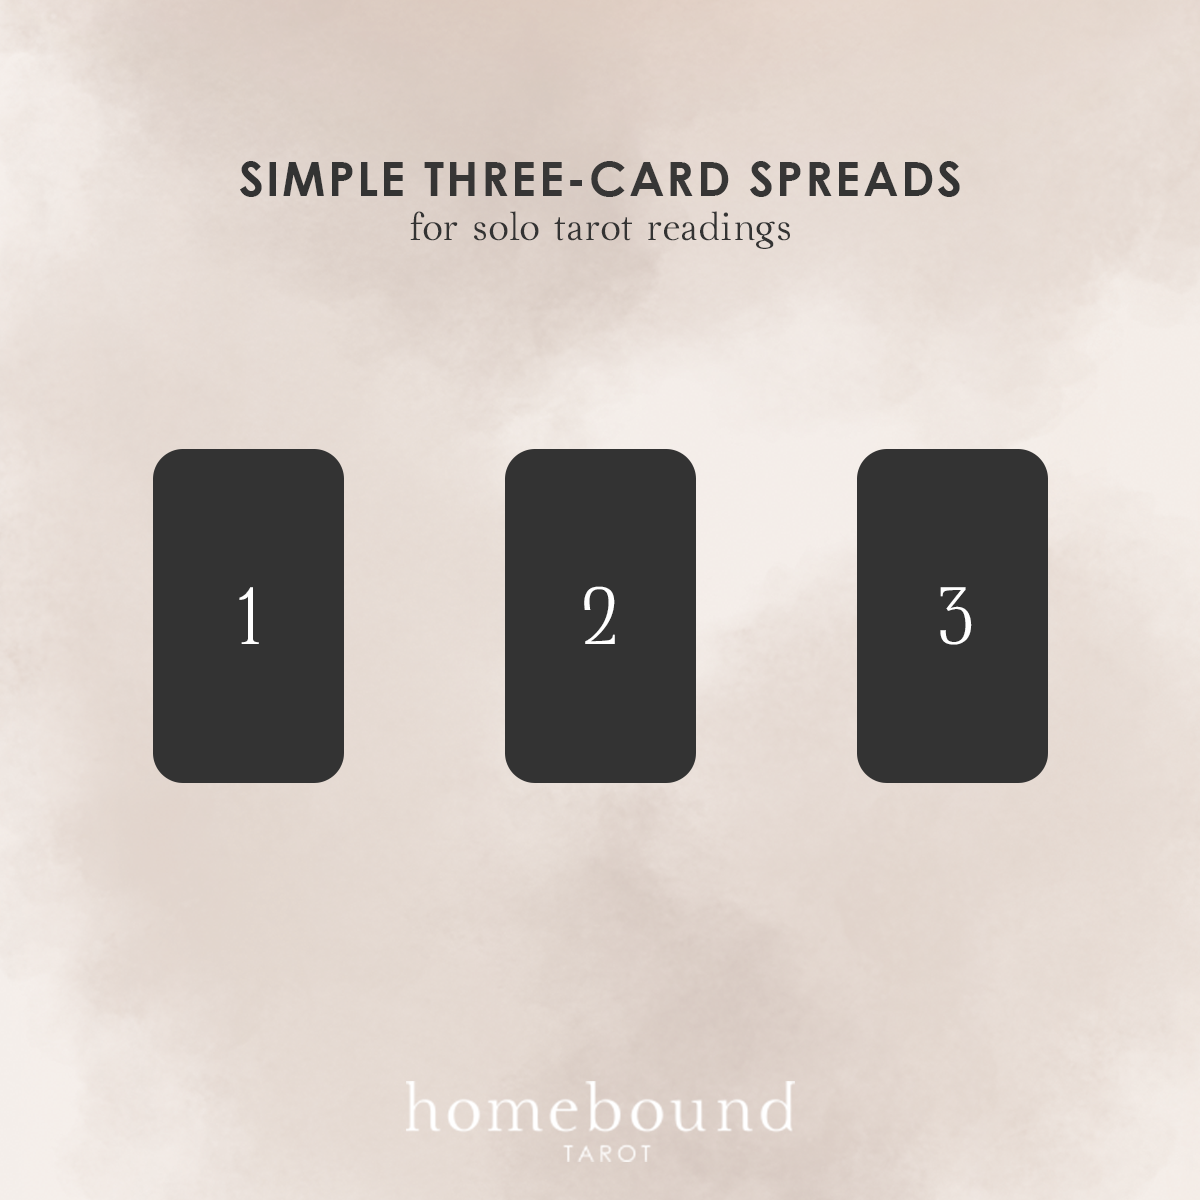 Simple Three-Card Spreads for Solo Tarot Readings Homebound Tarot